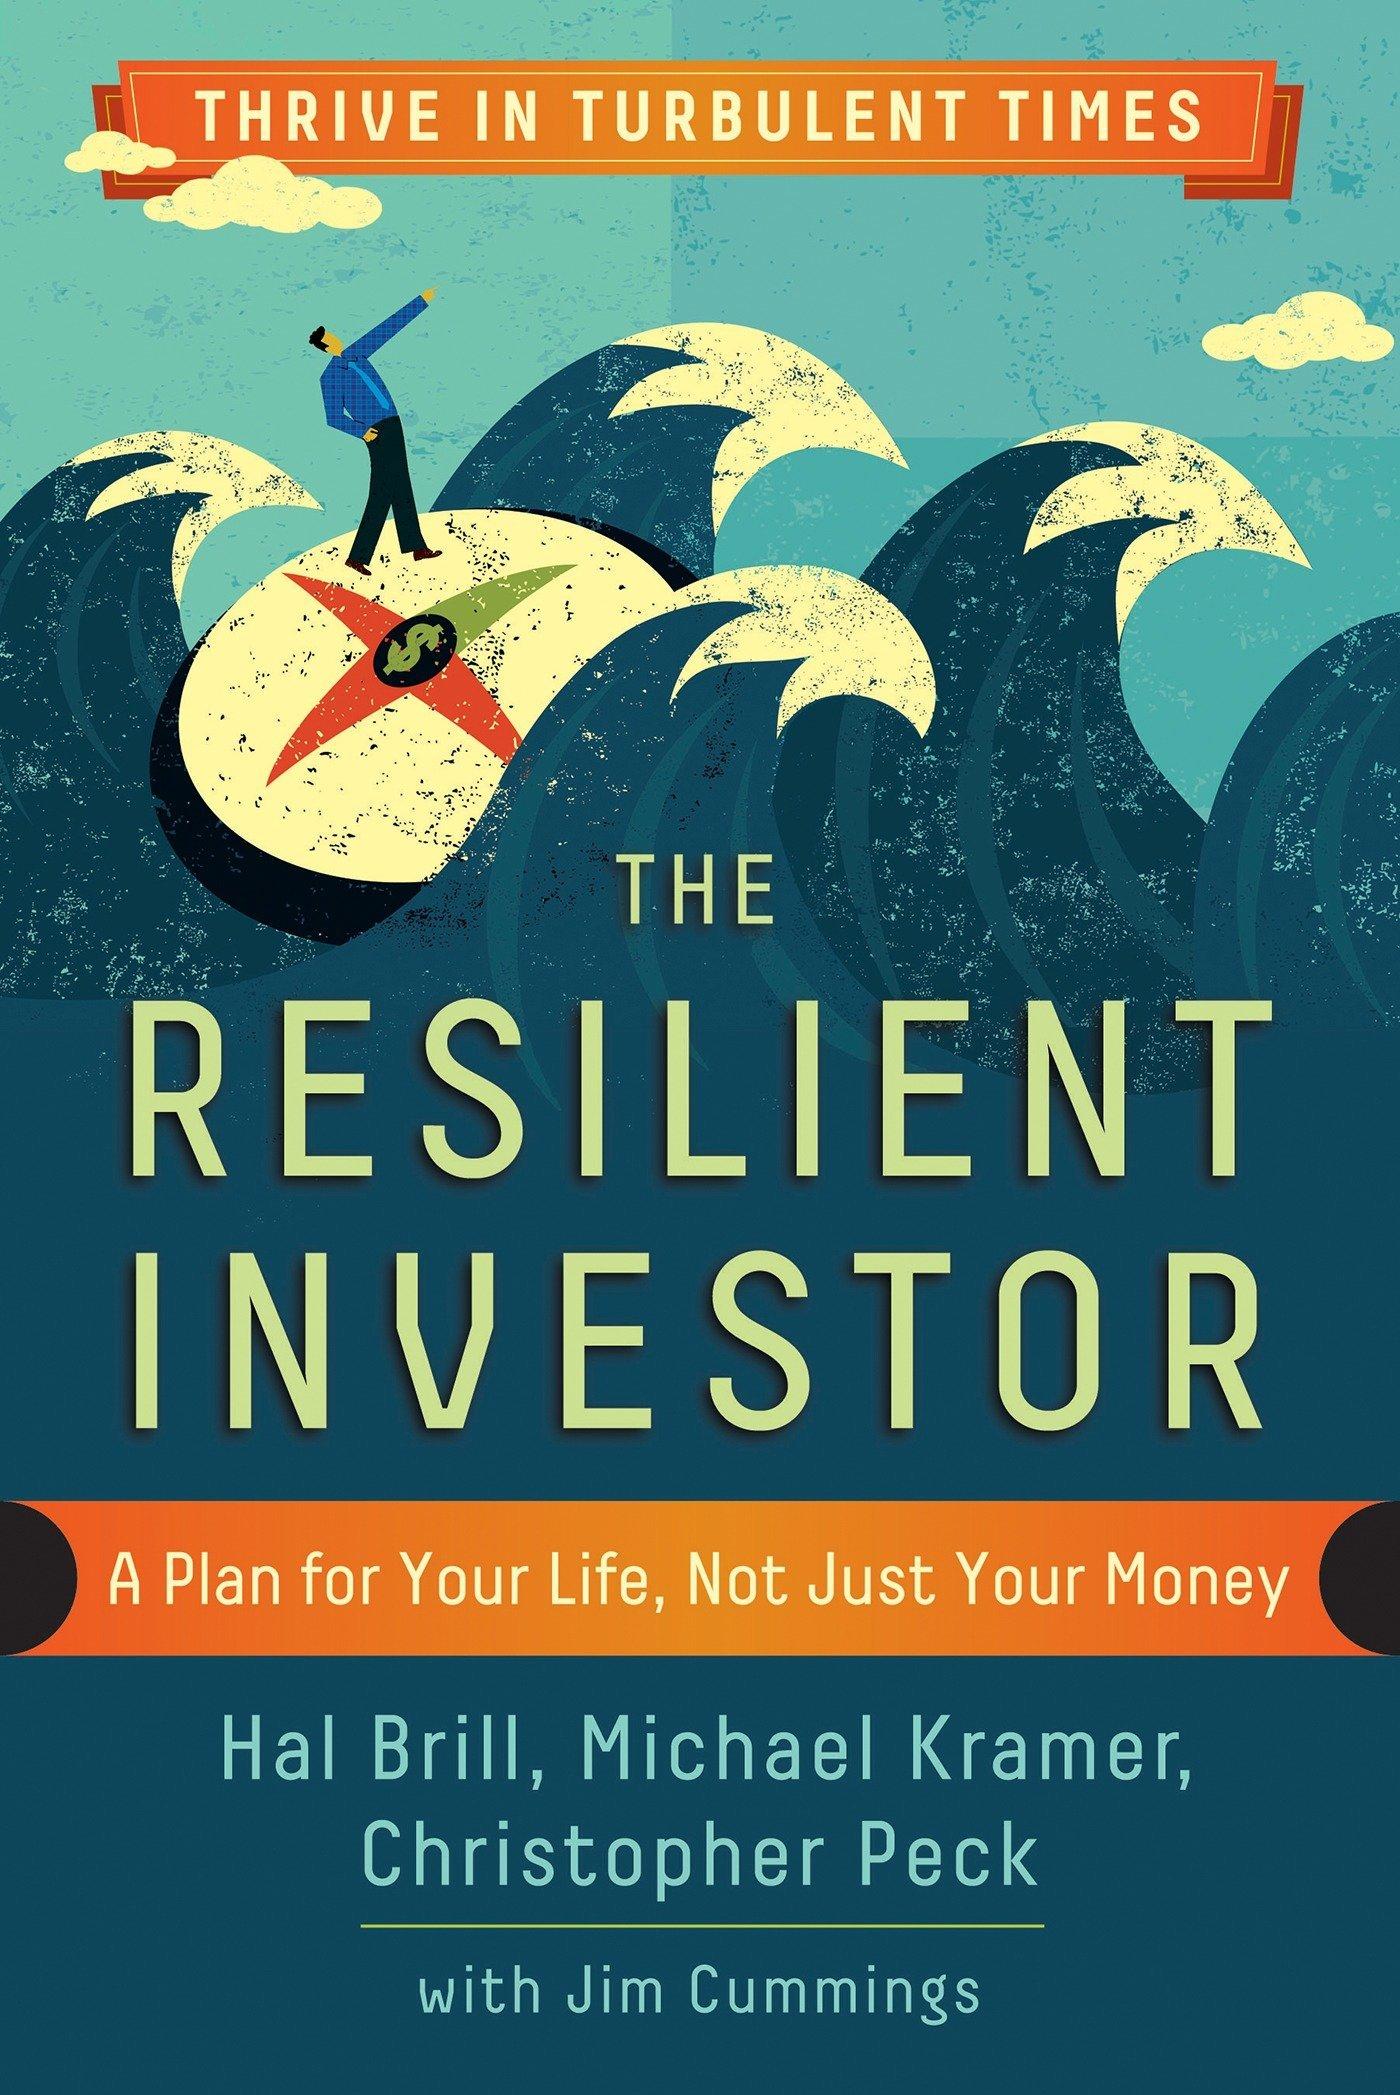 the resilient investor a plan for your life not just your money 1st edition hal brill, michael kramer,